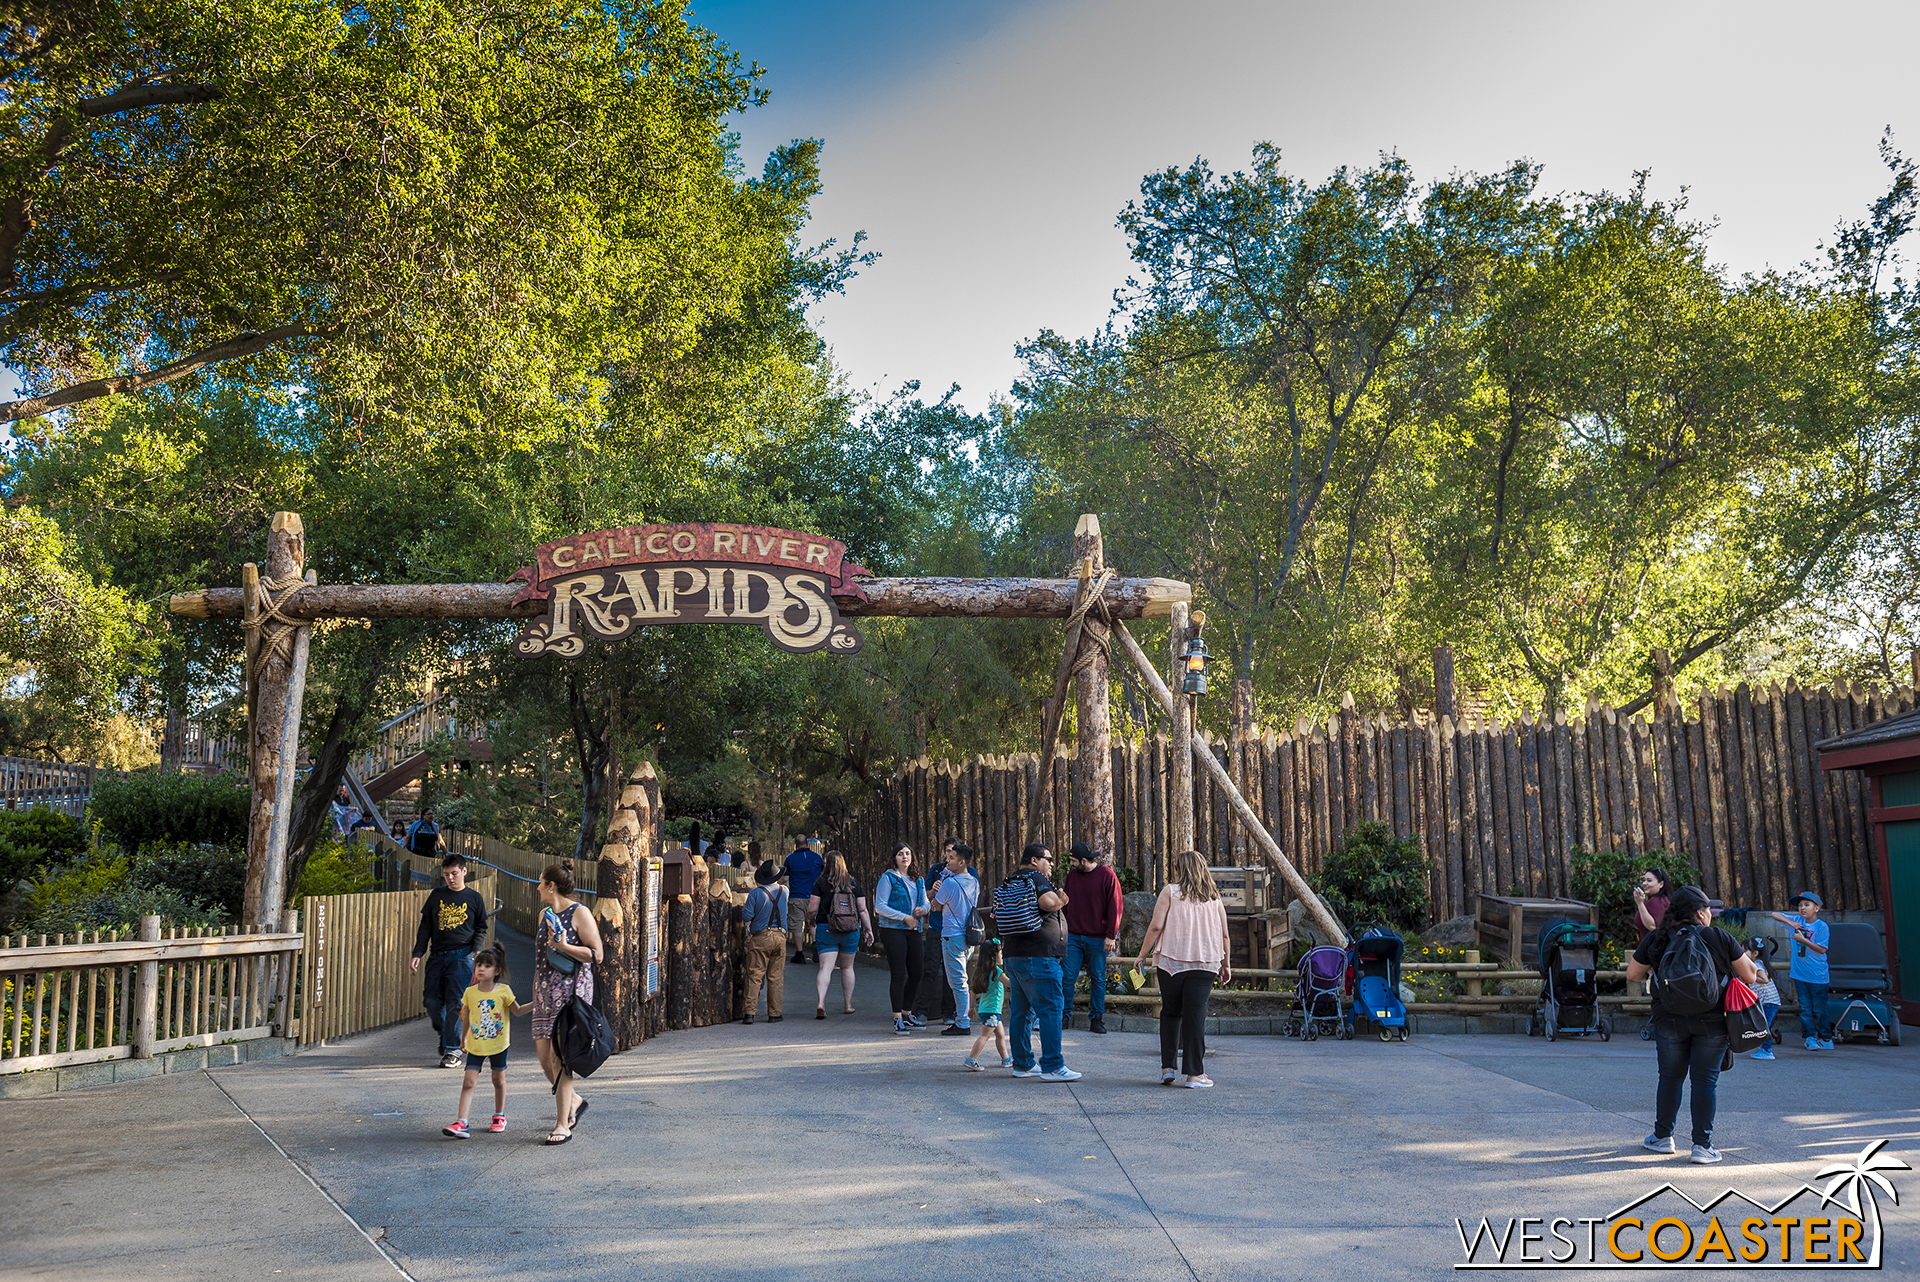  Welcome to Calico River Rapids!  An outpost at the edge of Ghost Town’s city limits. 